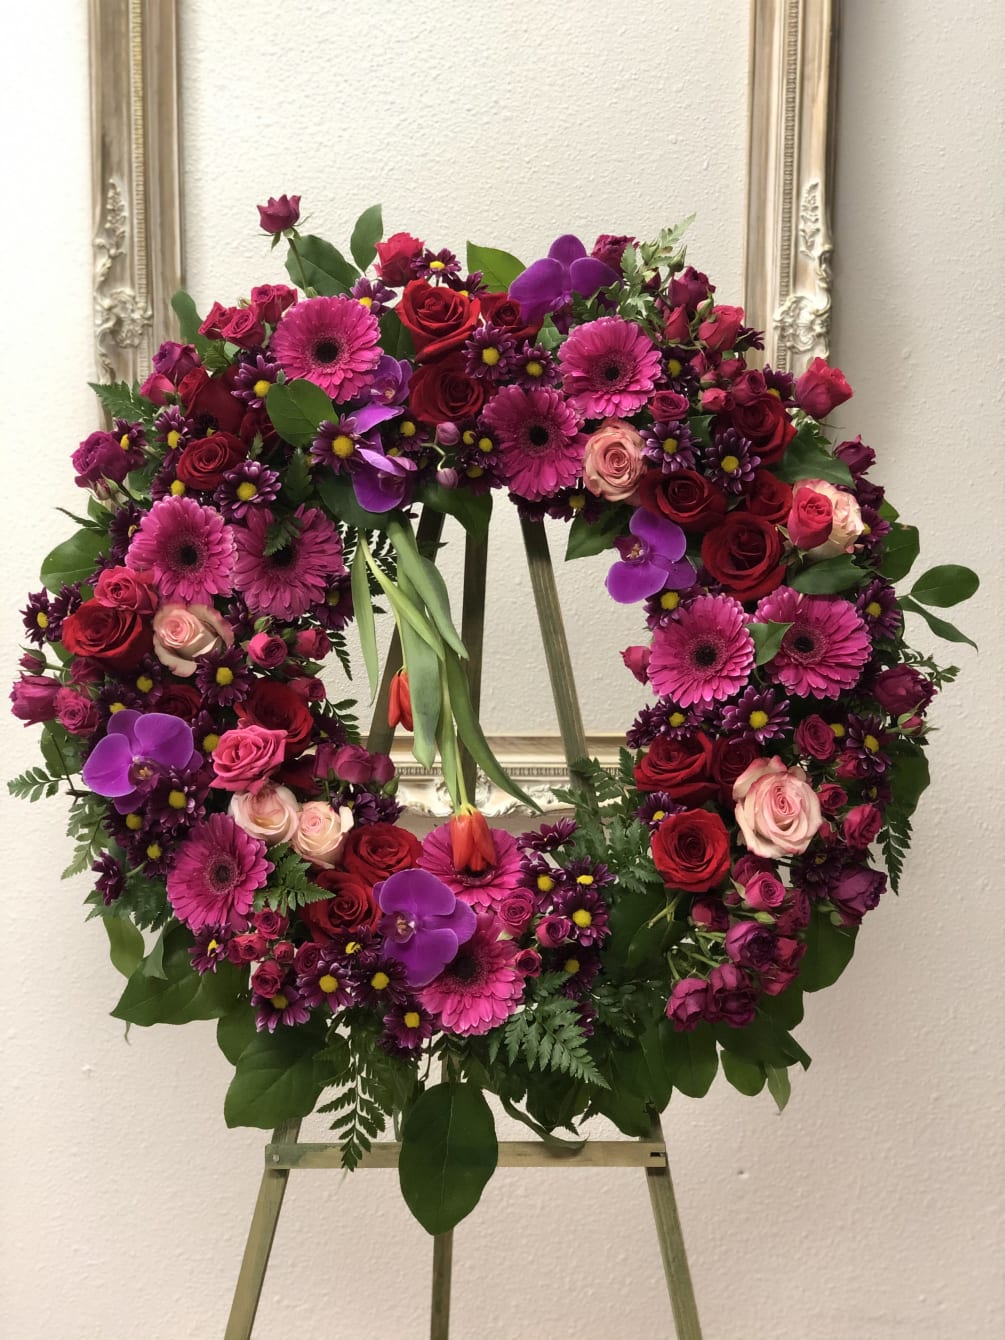 Combination of bright color flowers for this funeral wreath makes it stand